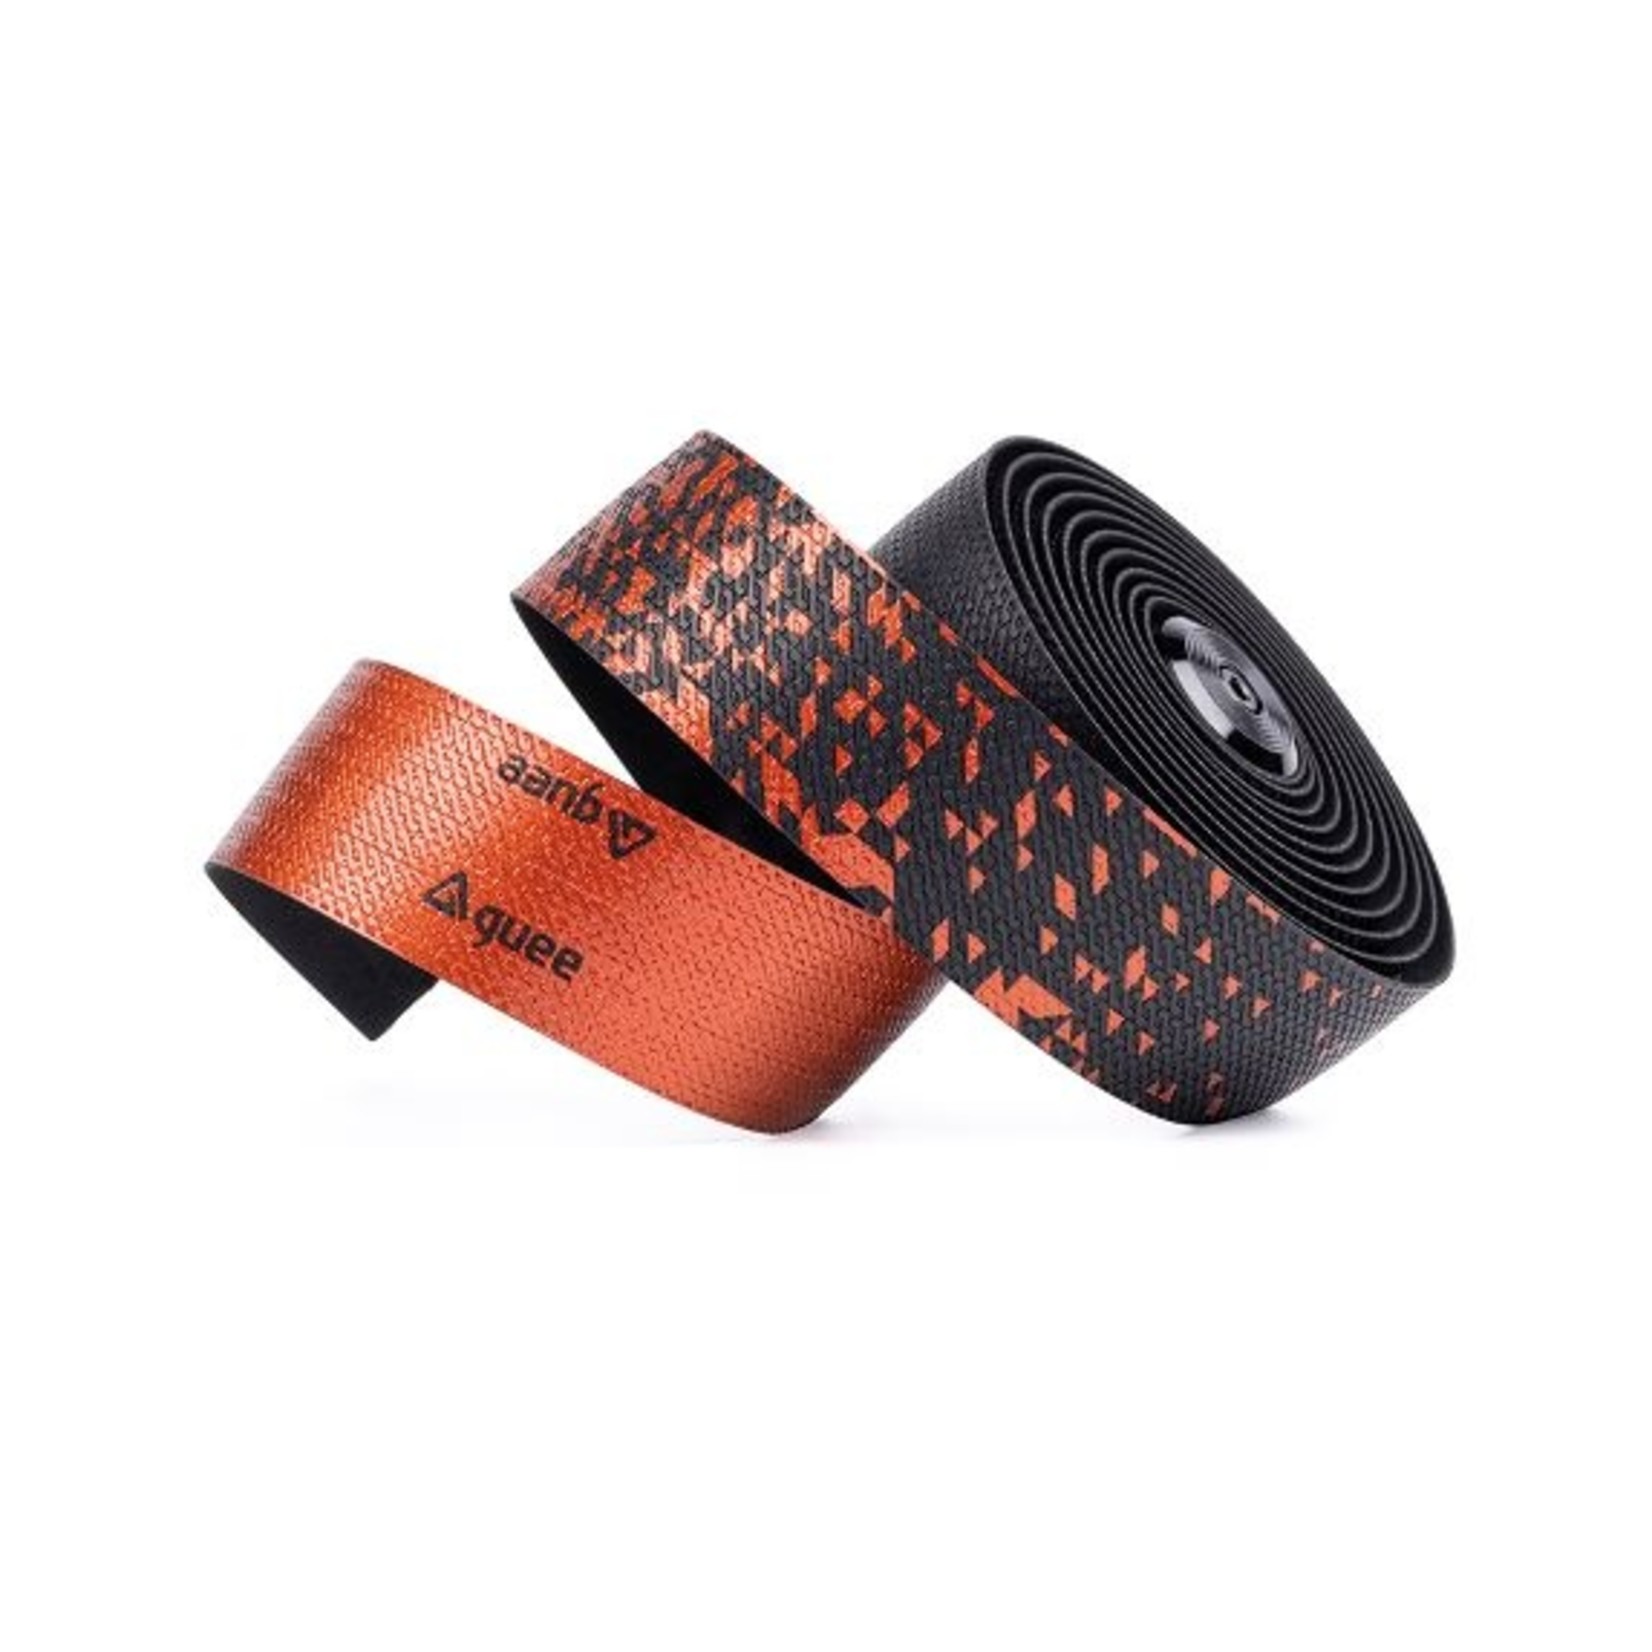 Guee Guee Bicycle Bar Tape - Dual - Limited Edition Metallic - Orange - Pair